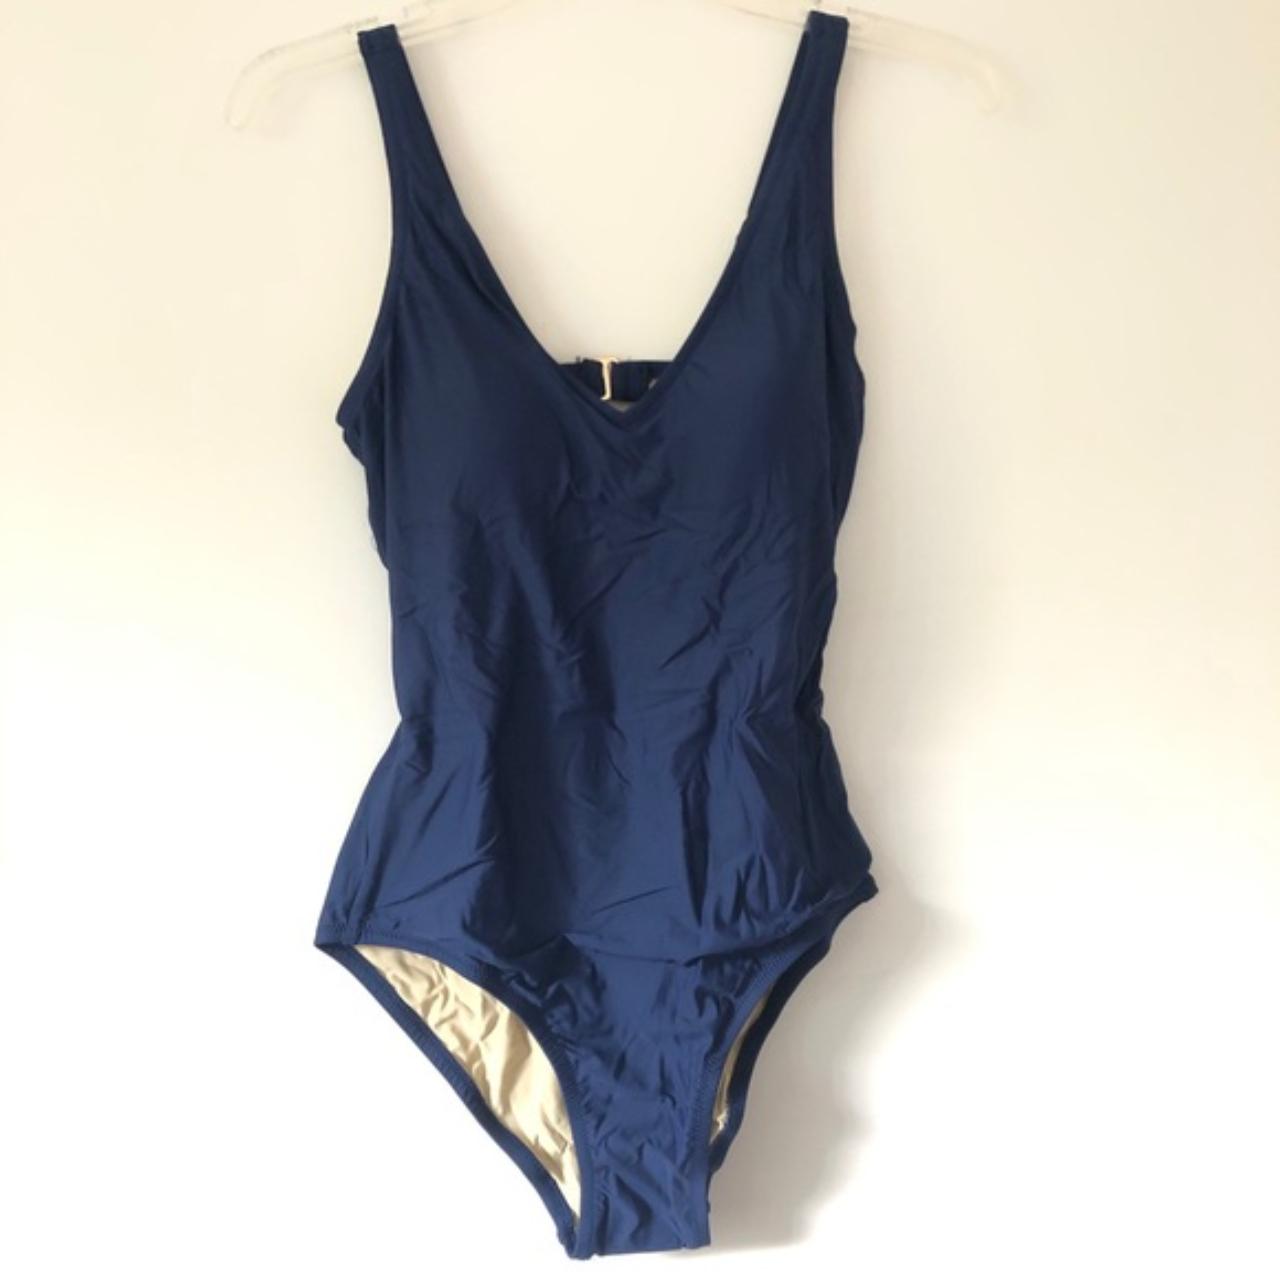 The Stacey Navy One-Piece Swimsuit. Stacey, our... - Depop